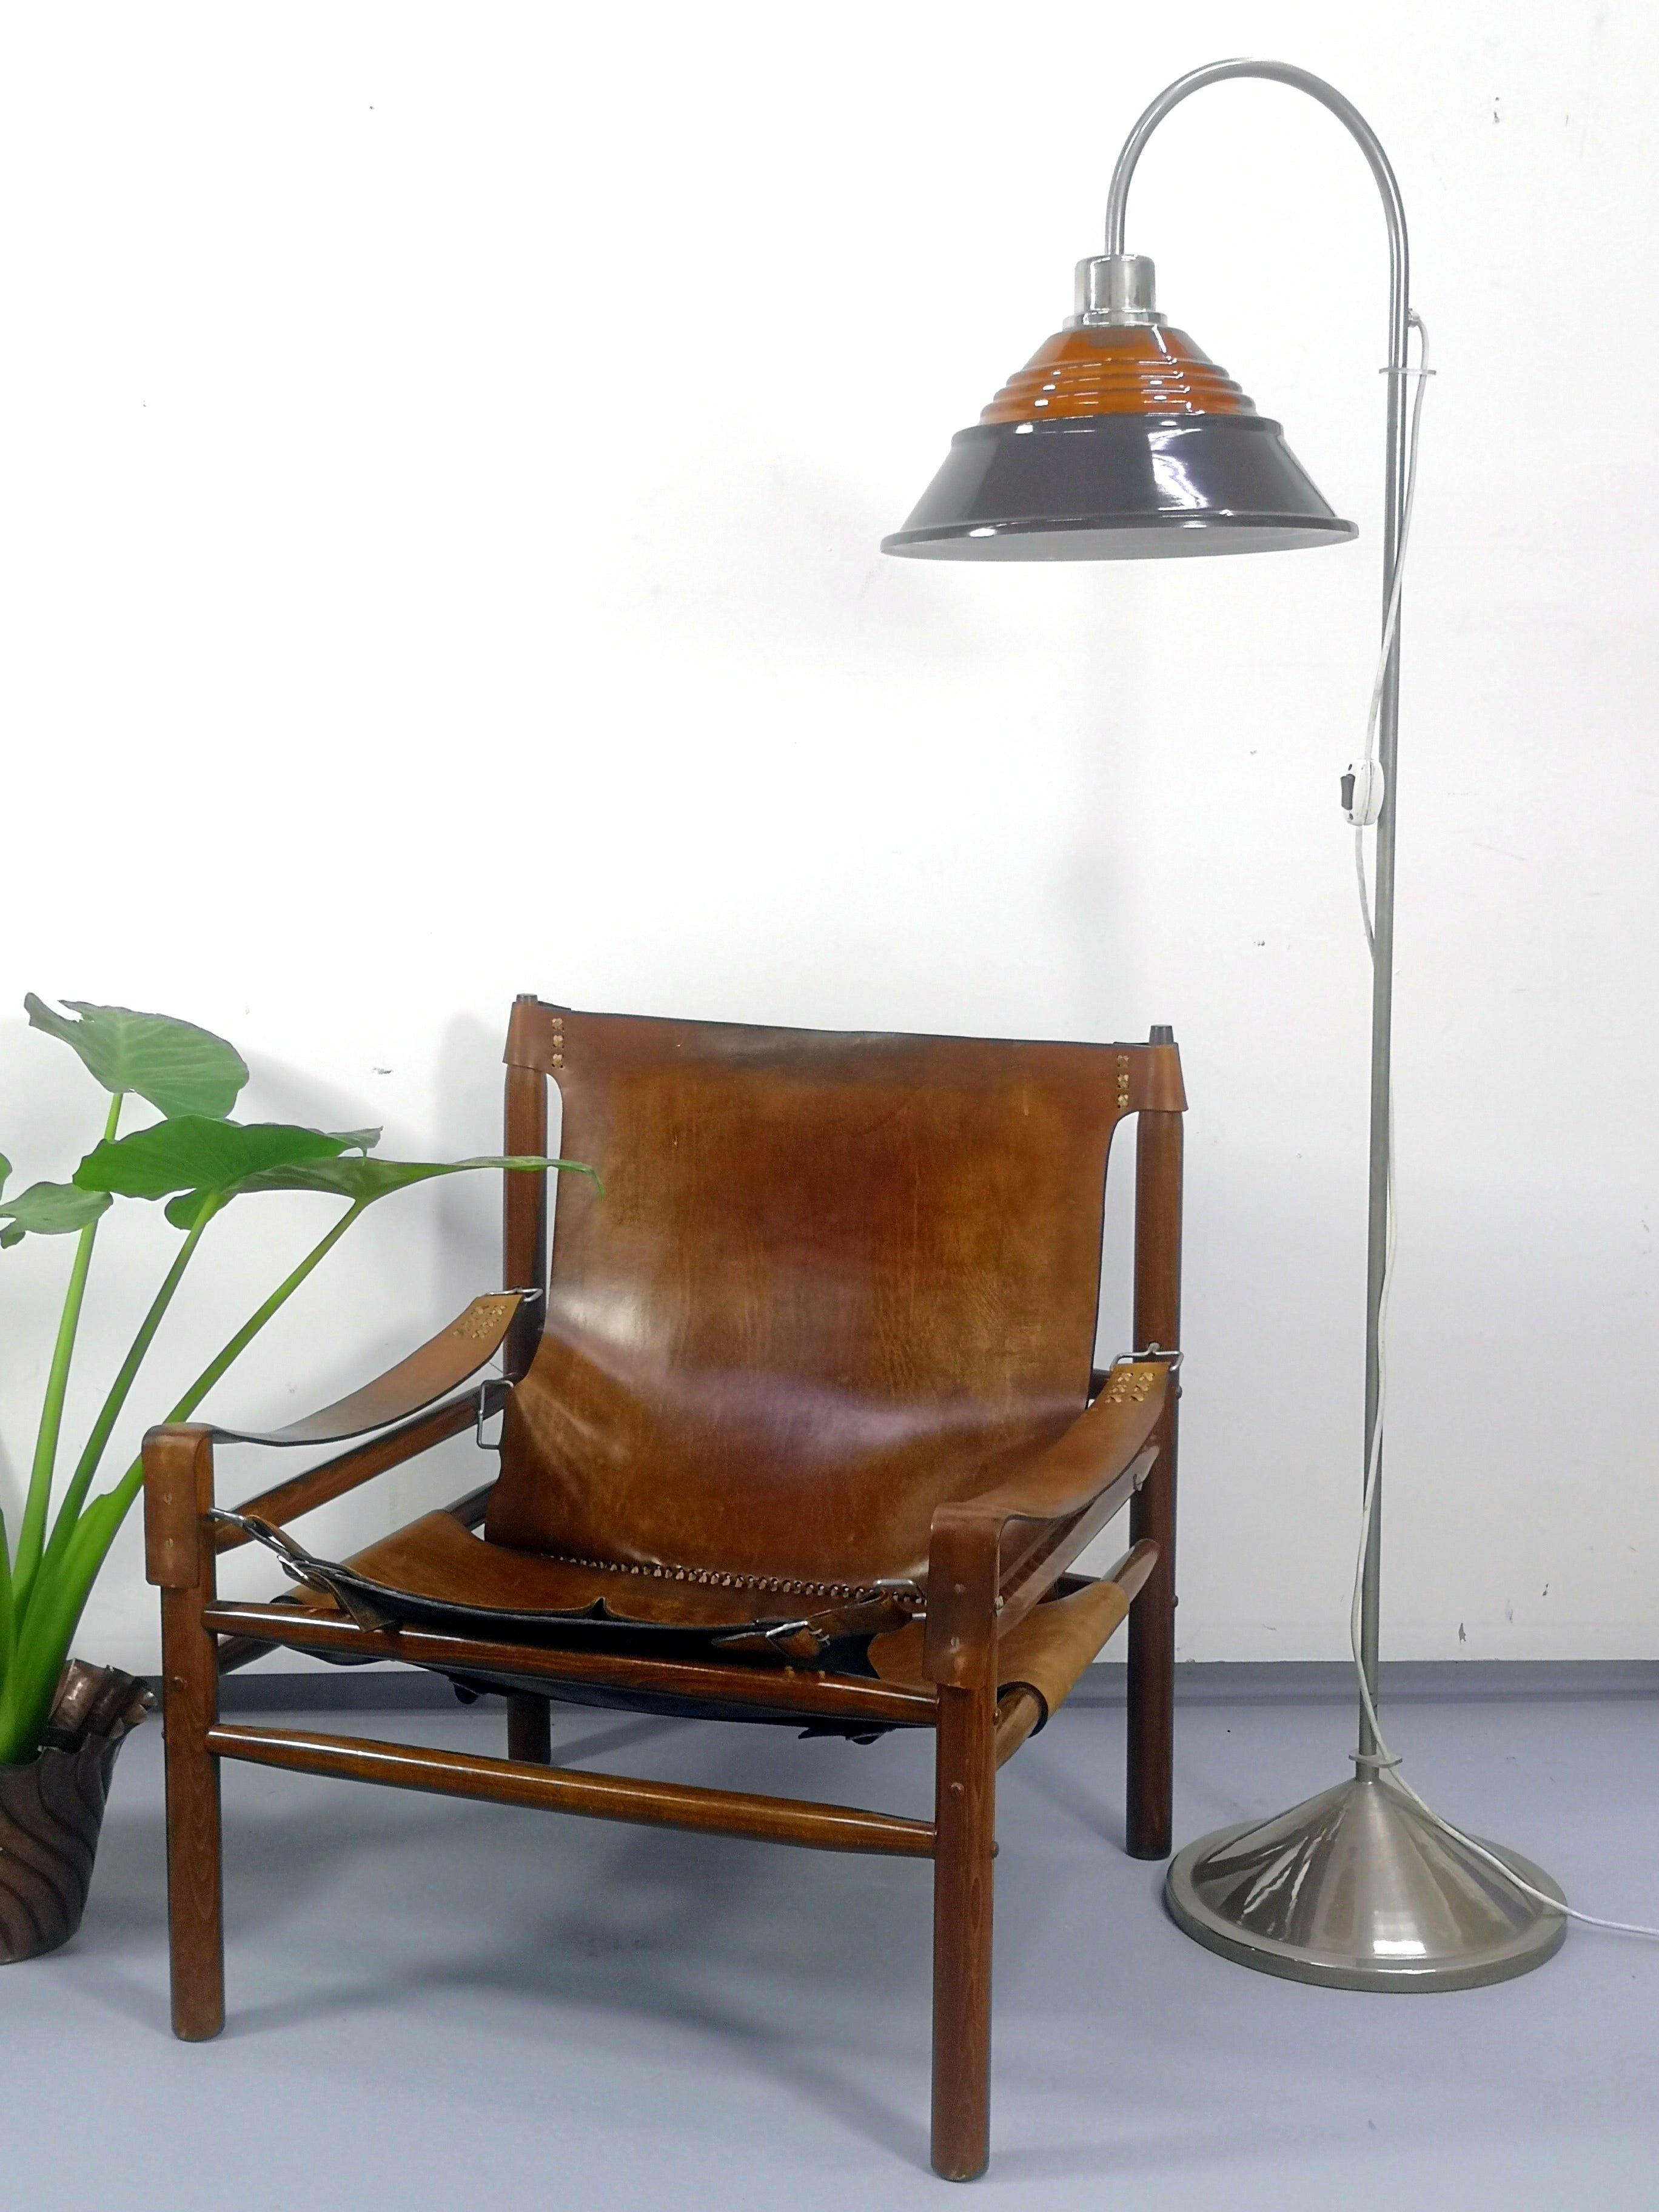 Midcentury nickel-plated floor lamp with amber glass head.